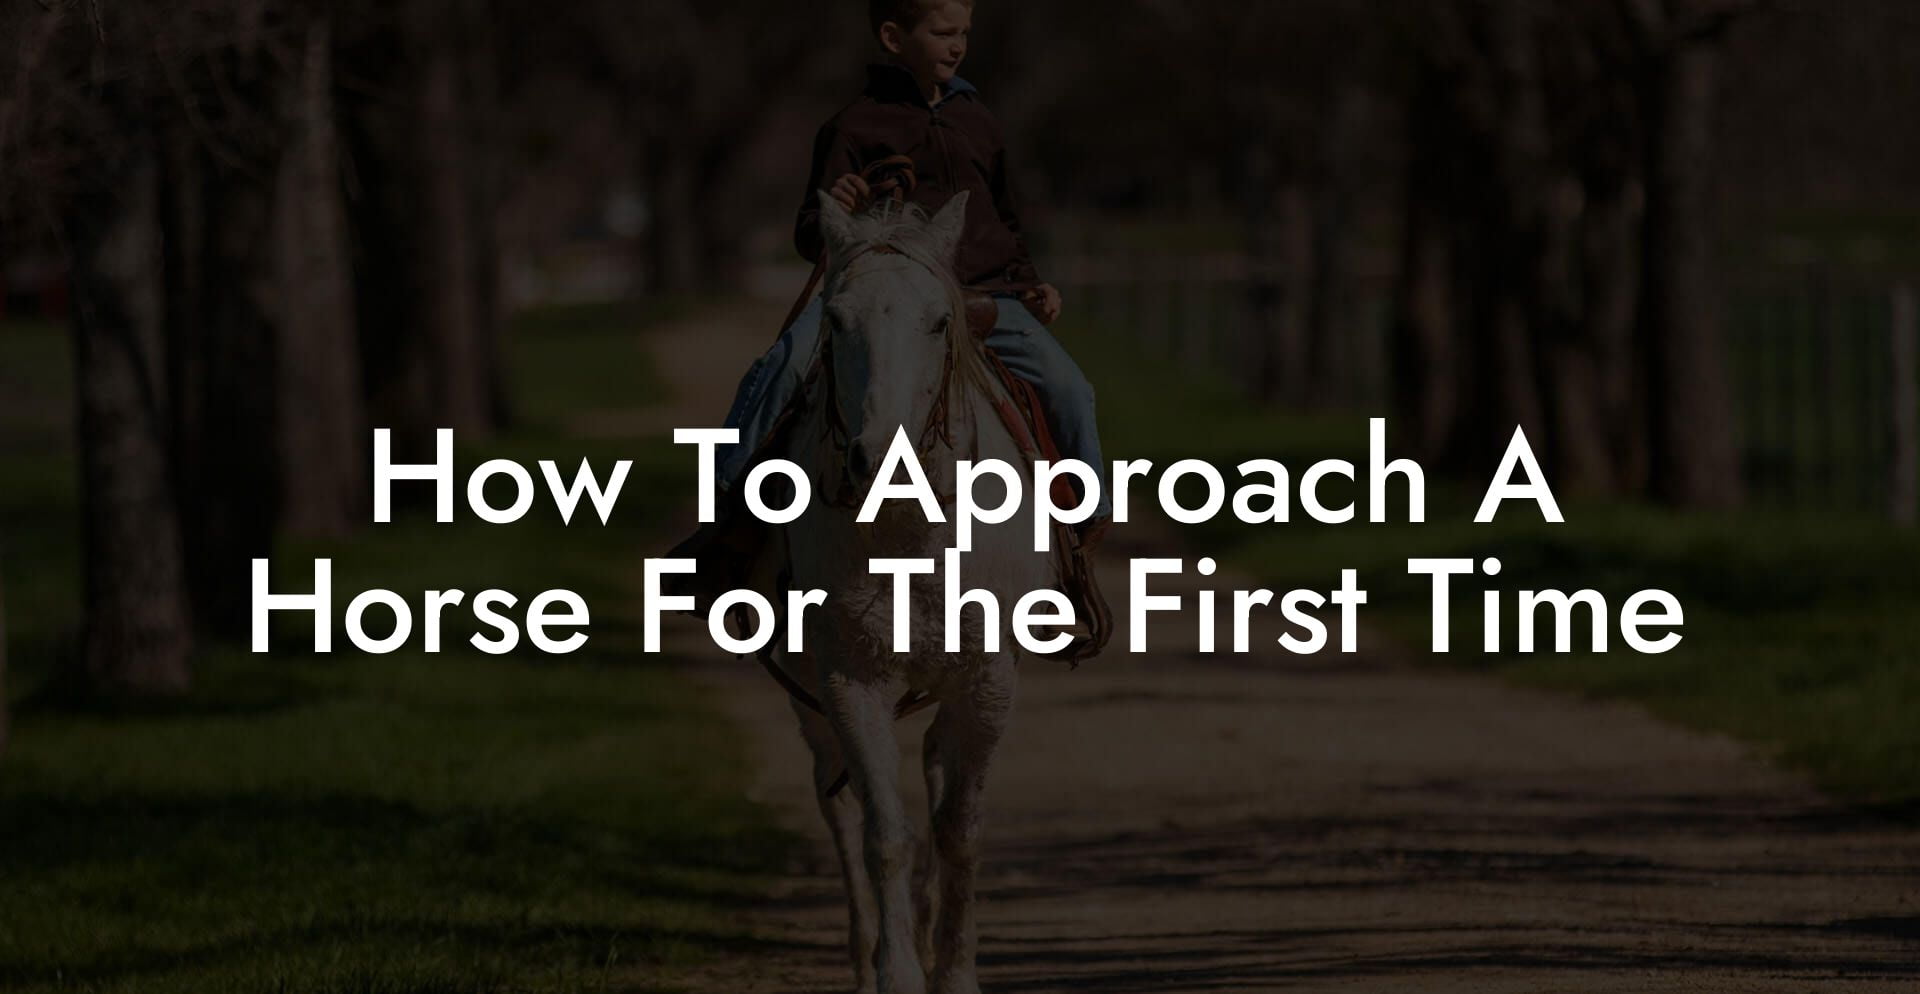 How To Approach A Horse For The First Time